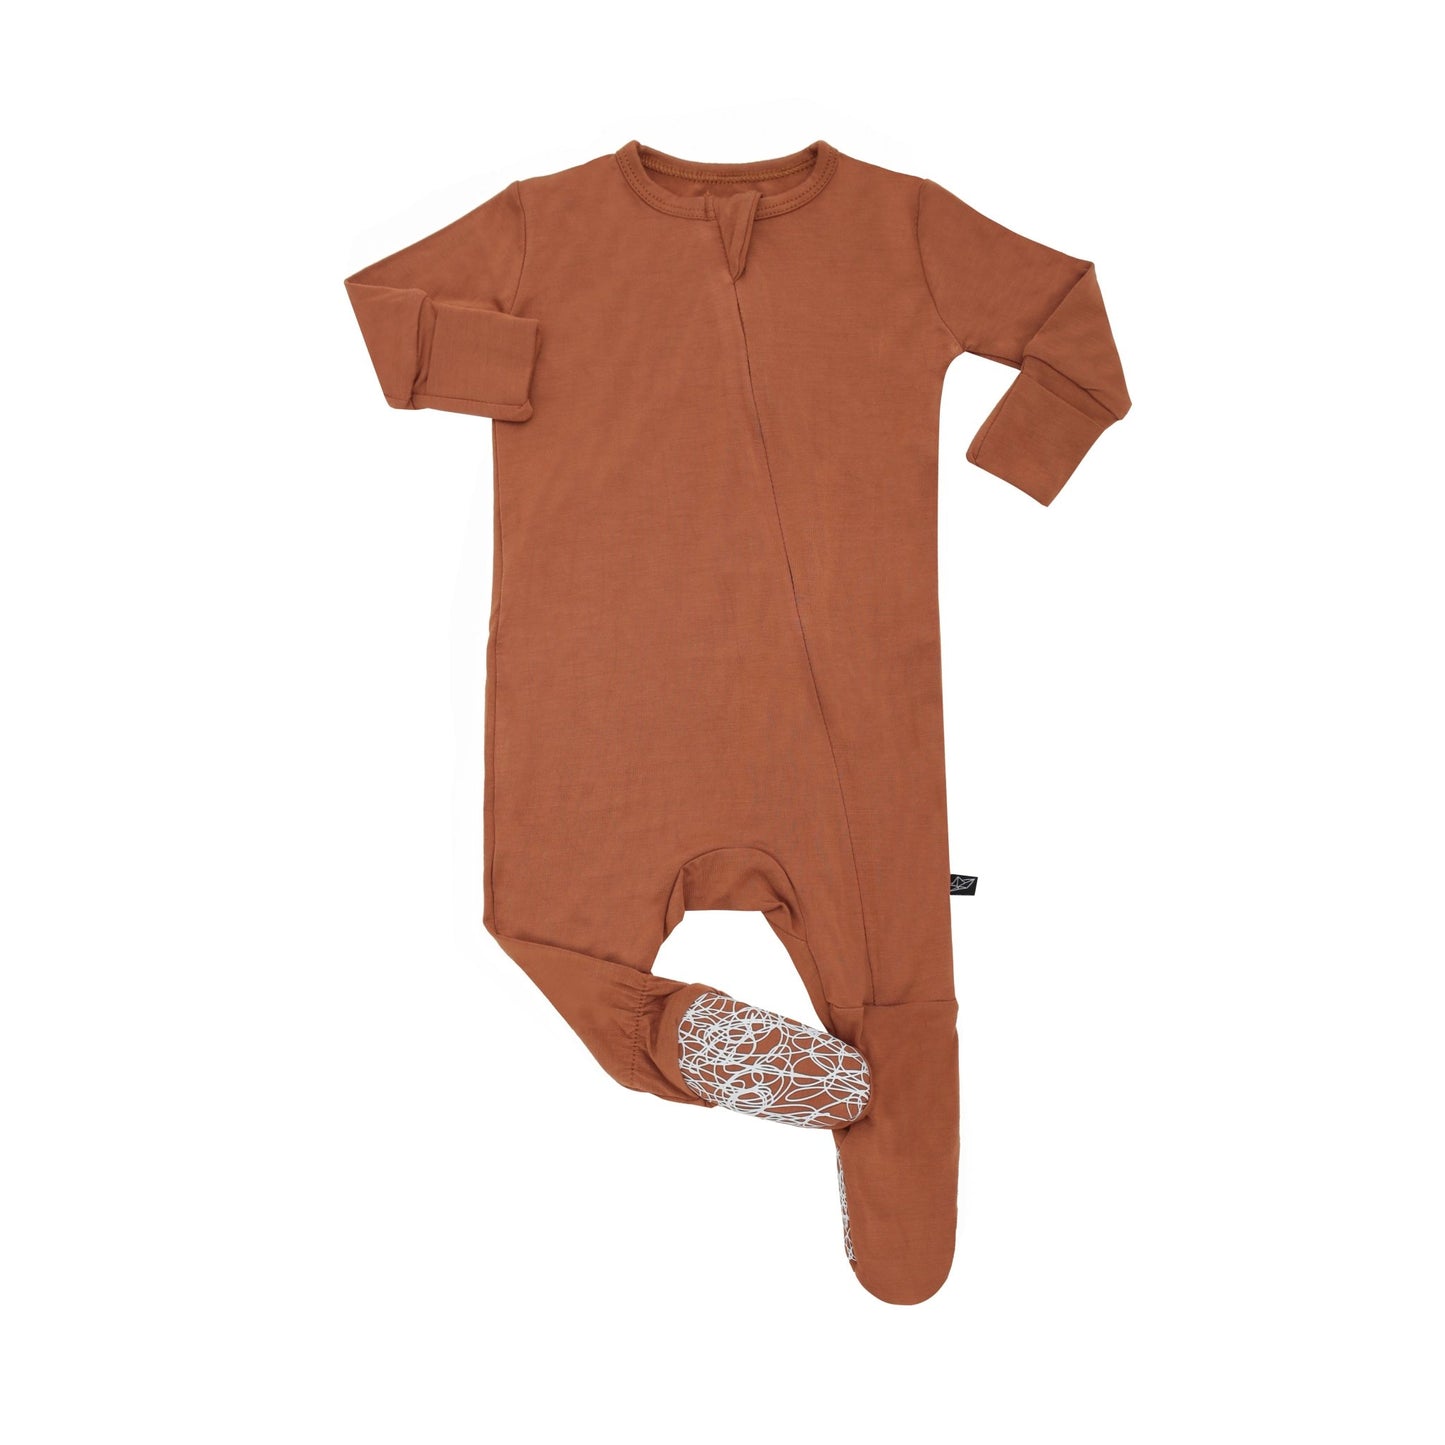 Ginger Infant Bamboo Footed Sleeper - Peregrine Kidswear - Footed Sleepers - 0-3M